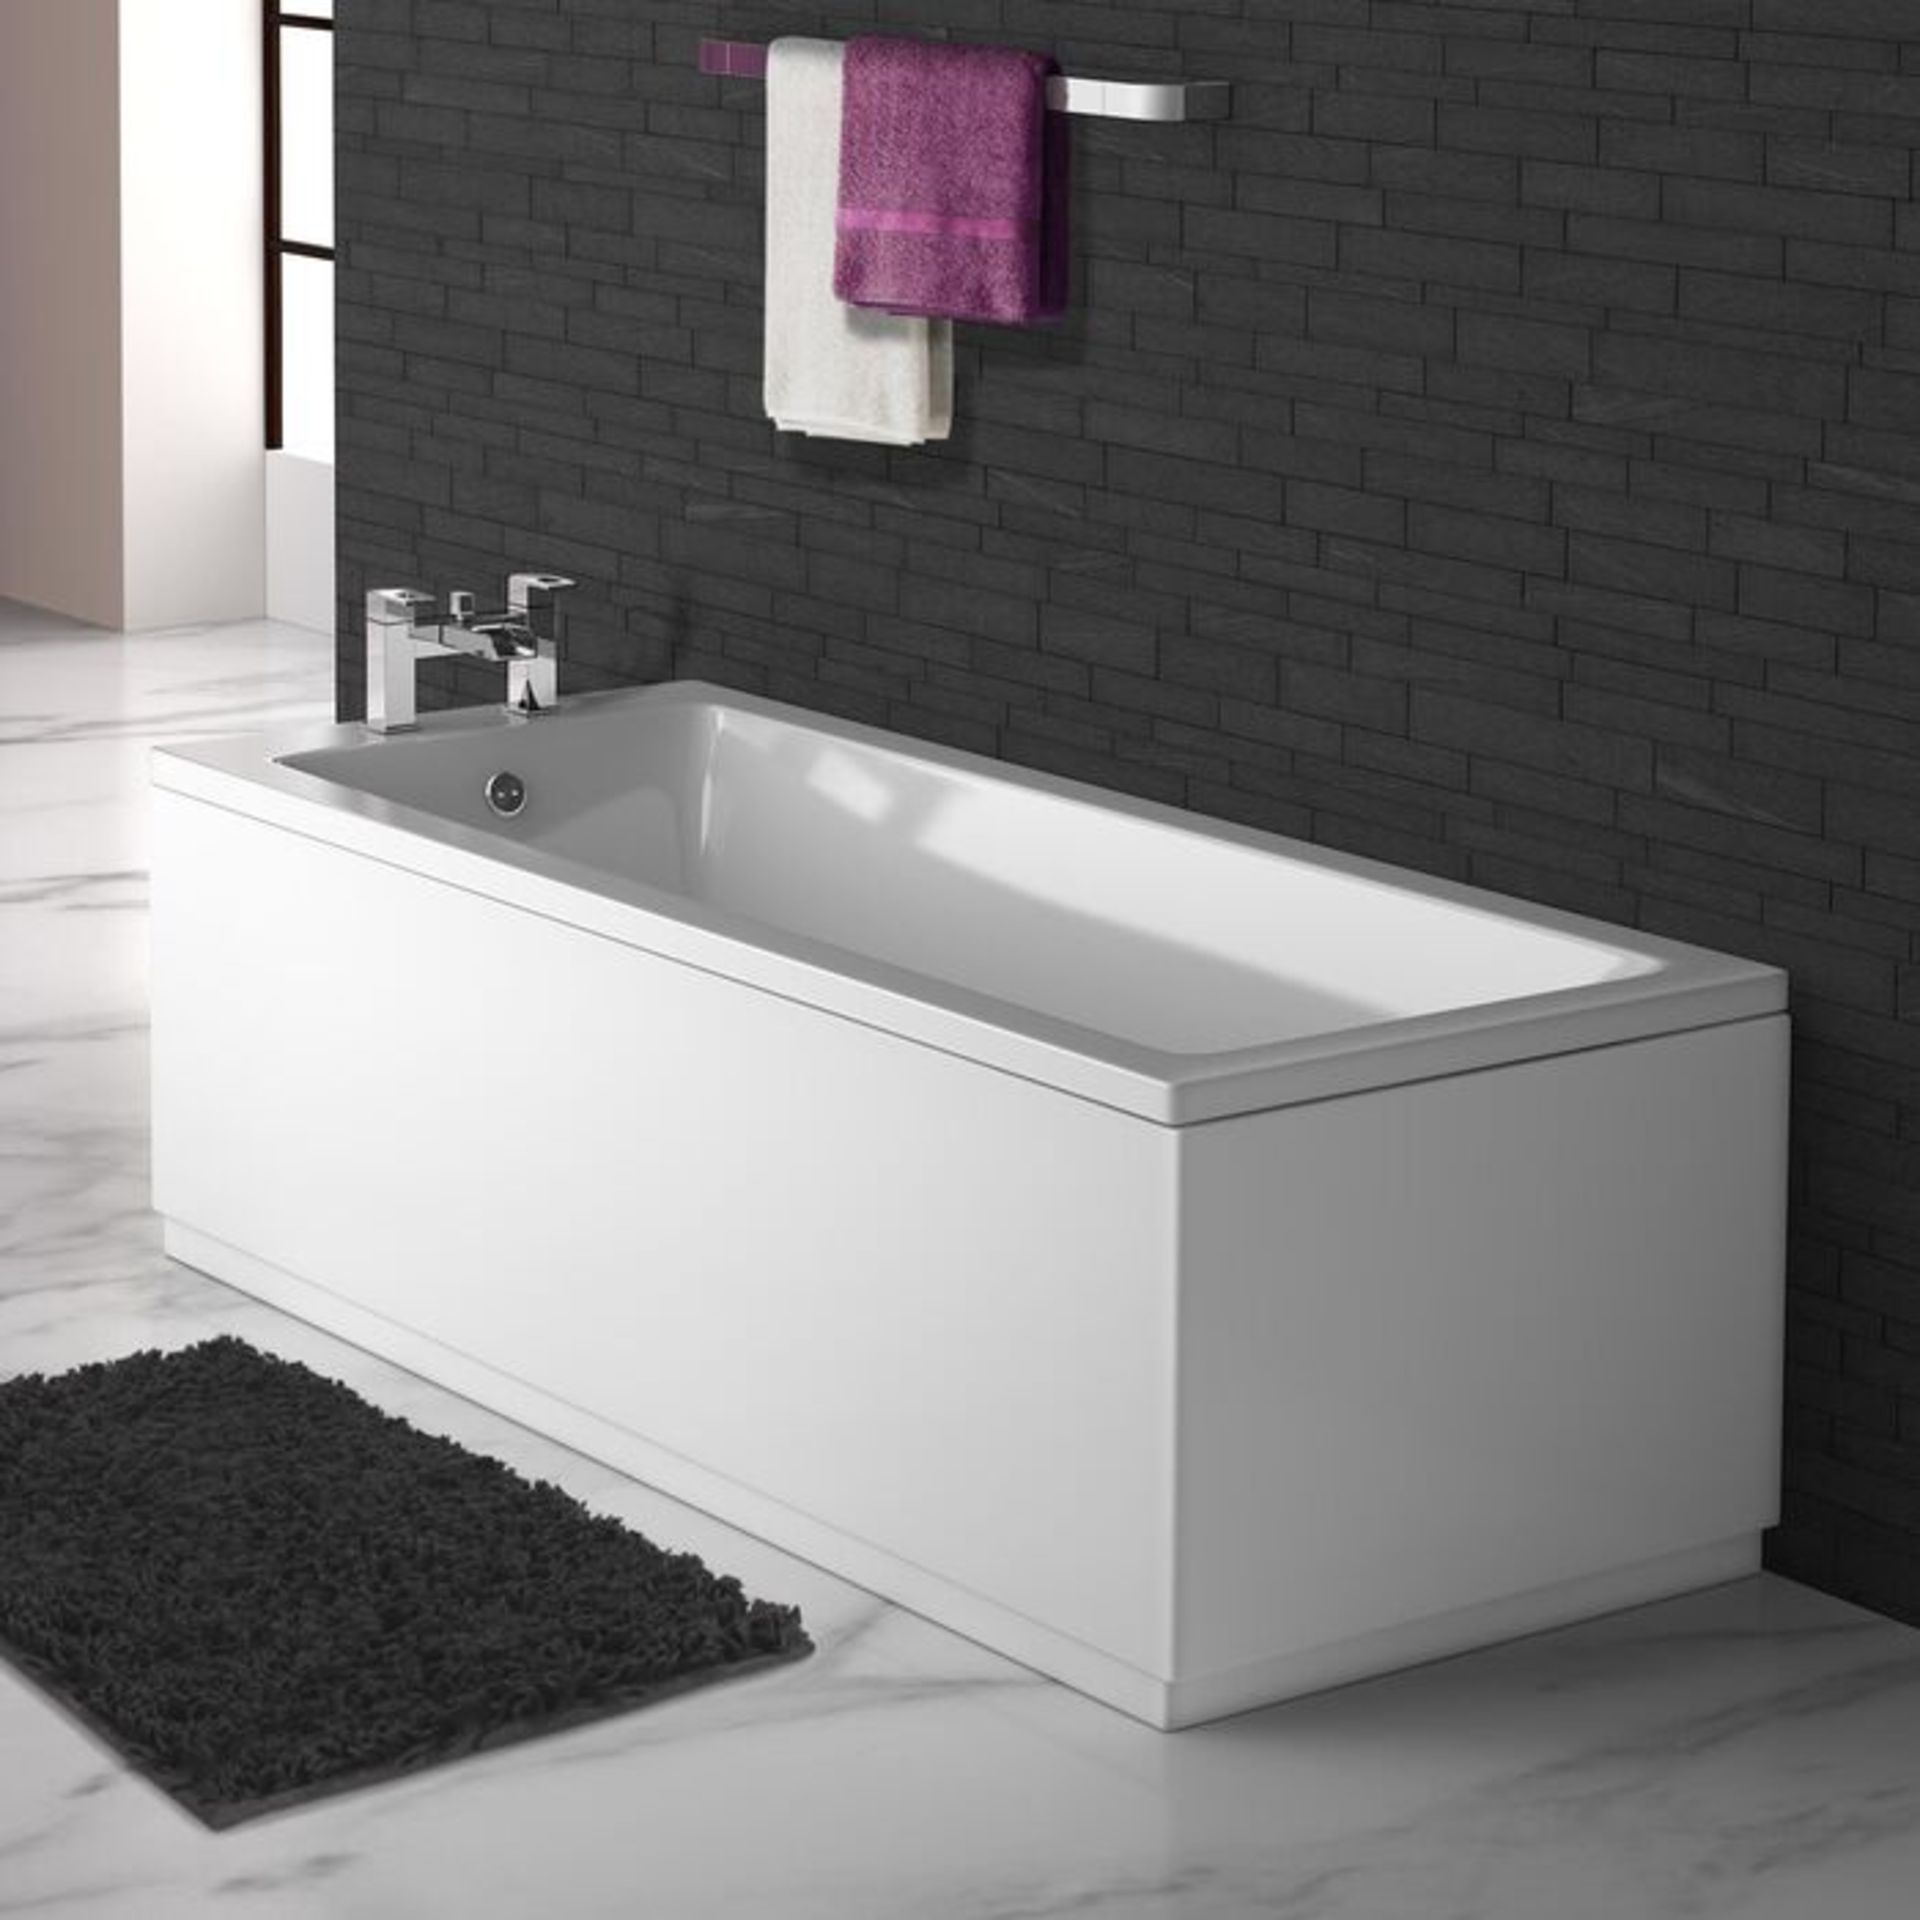 (Z215) 1400x700mm Square Single Ended Bath. Manufactured in the UK Sanitary grade cell cast re...